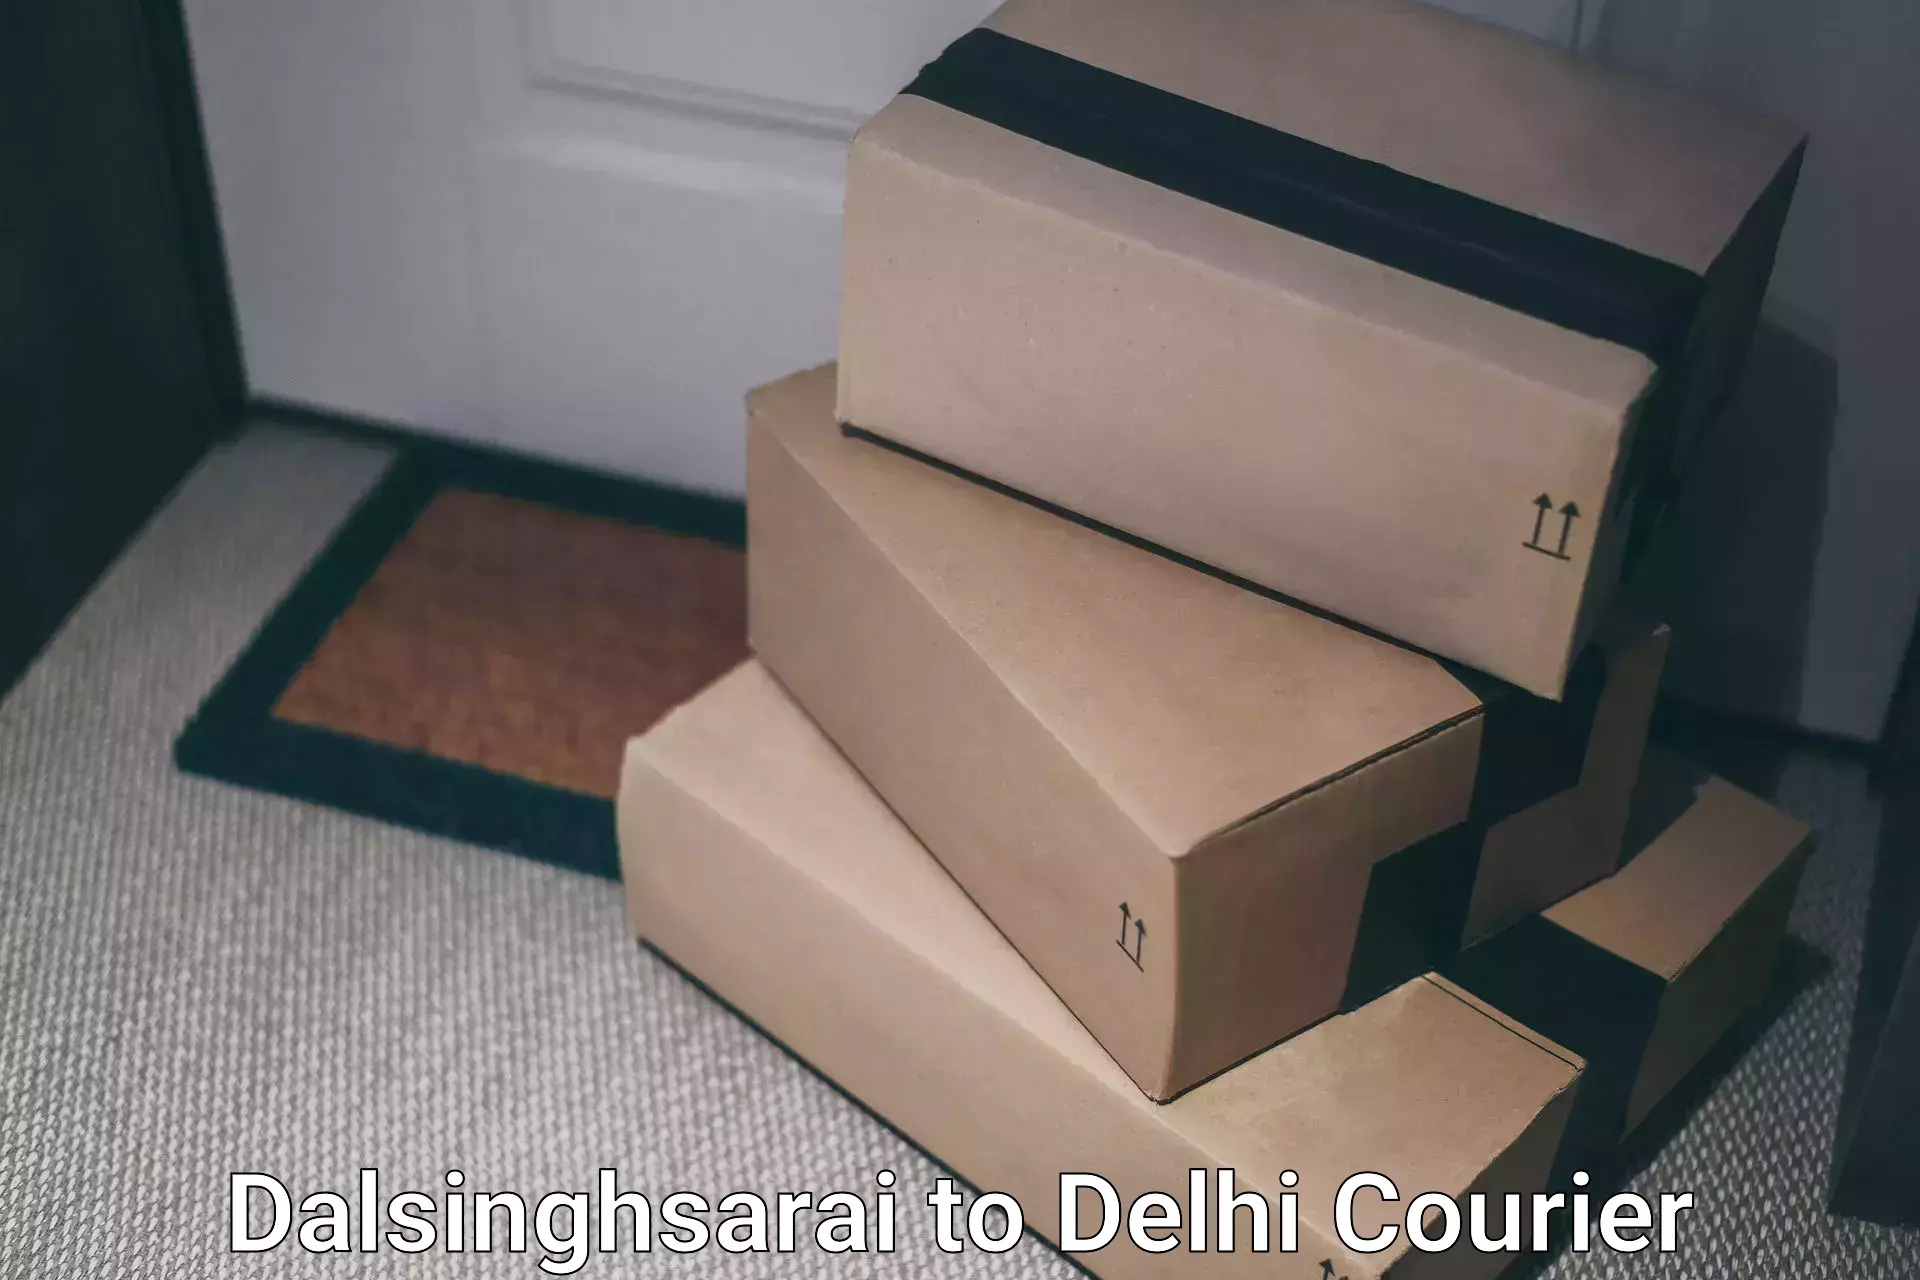 Express postal services Dalsinghsarai to NCR